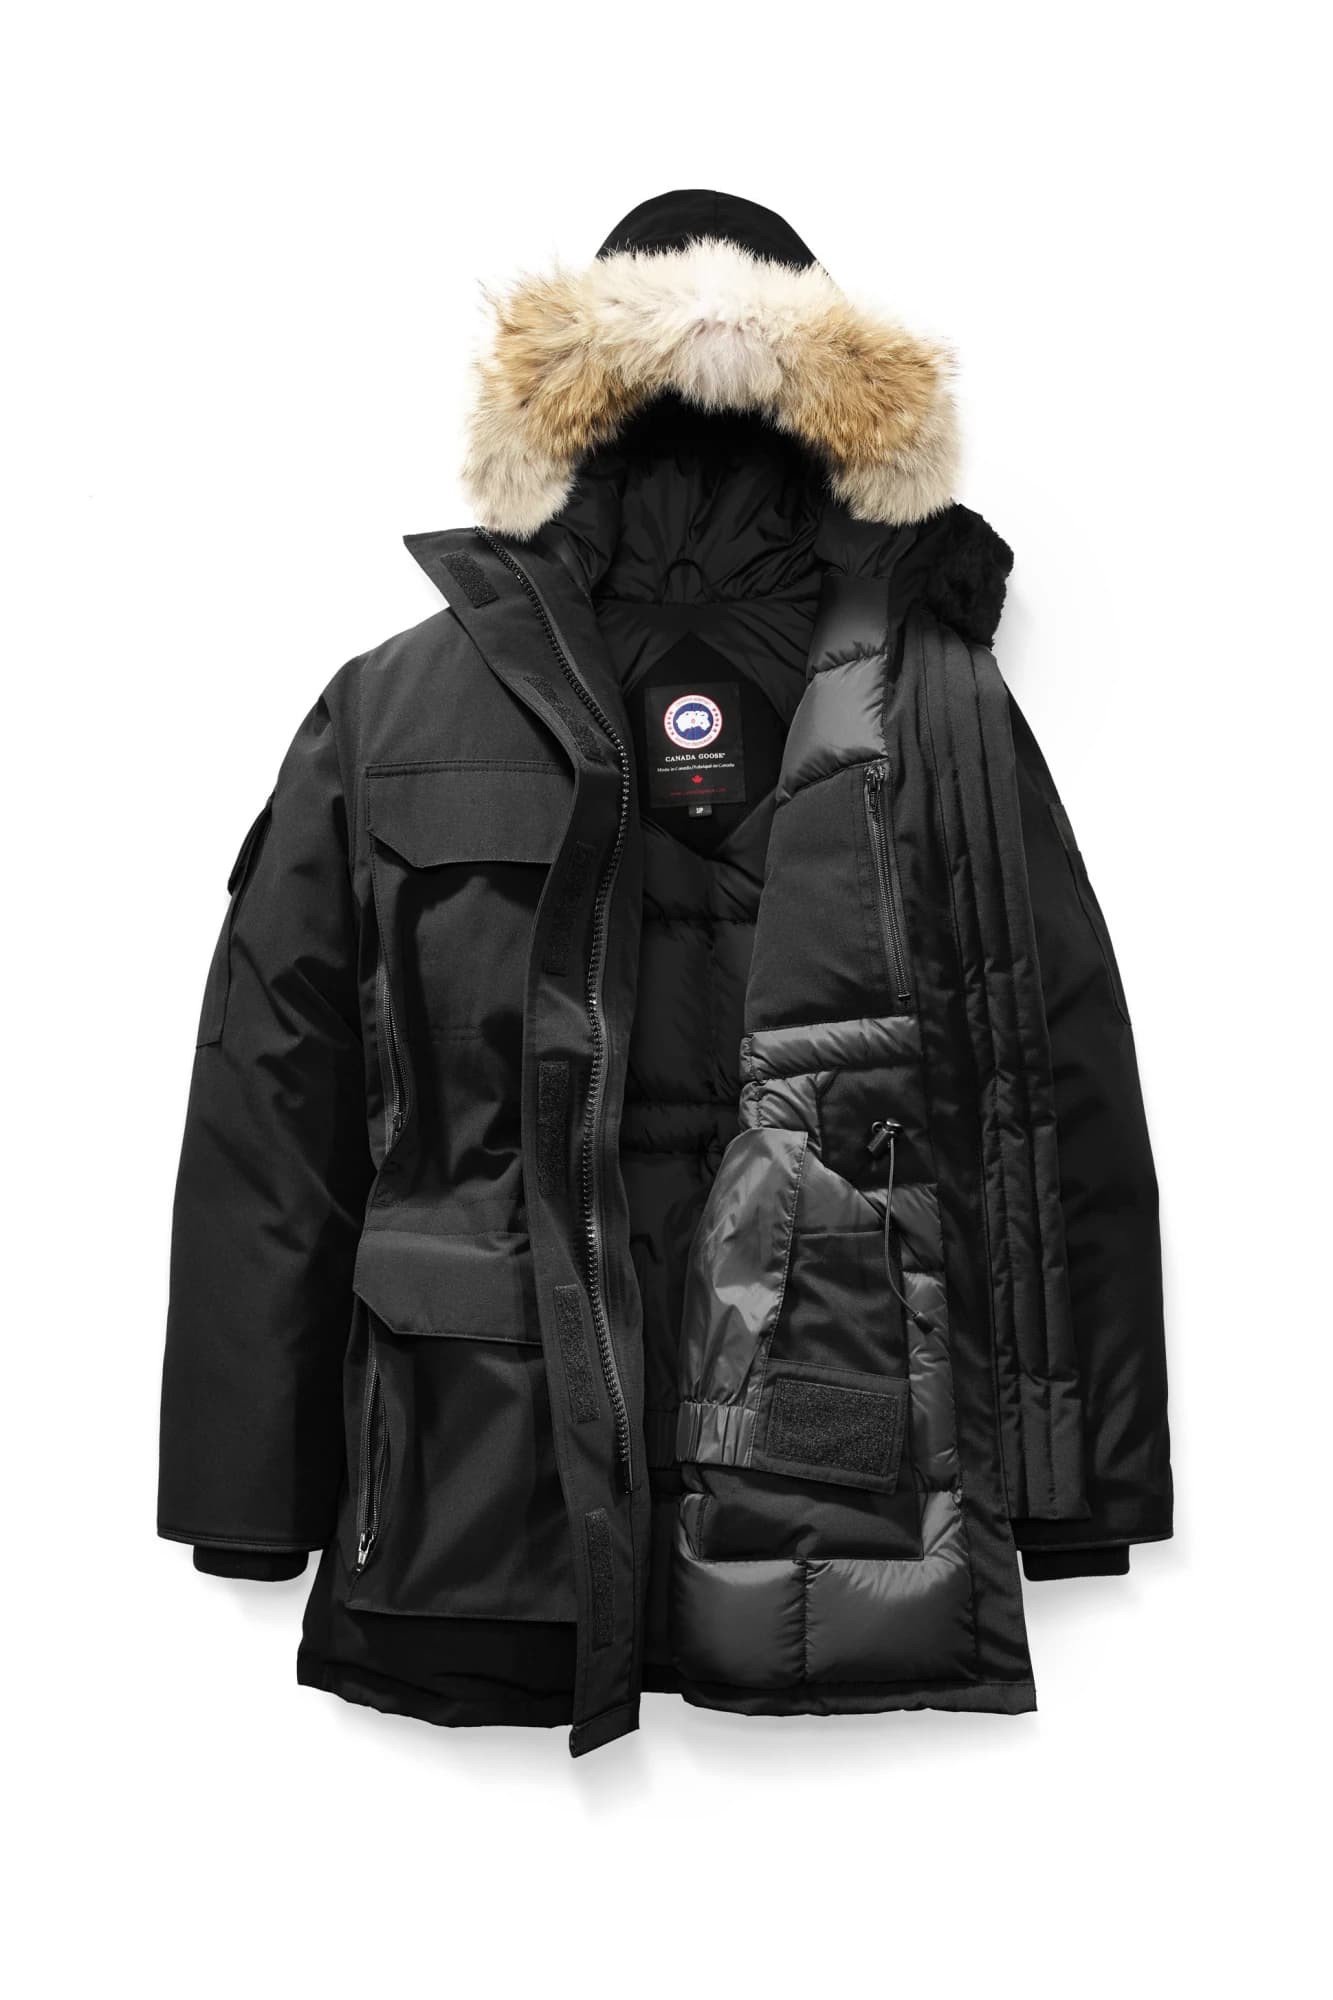 Canada Goose Women's Expedition Parka - Black - M